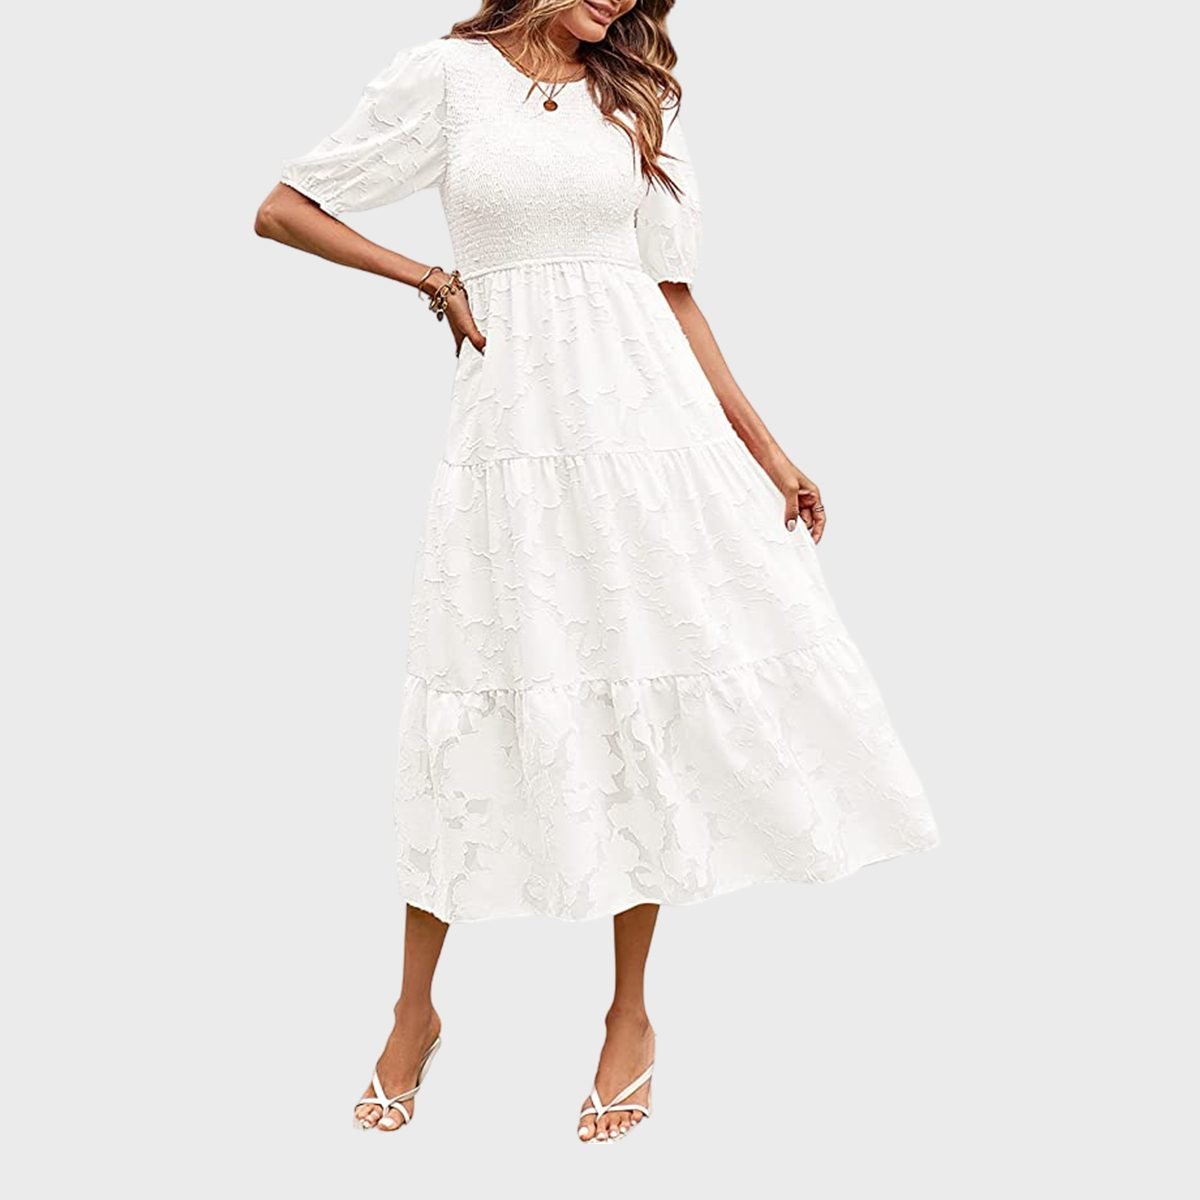 15 of the Best Amazon White Dress Options for Summer